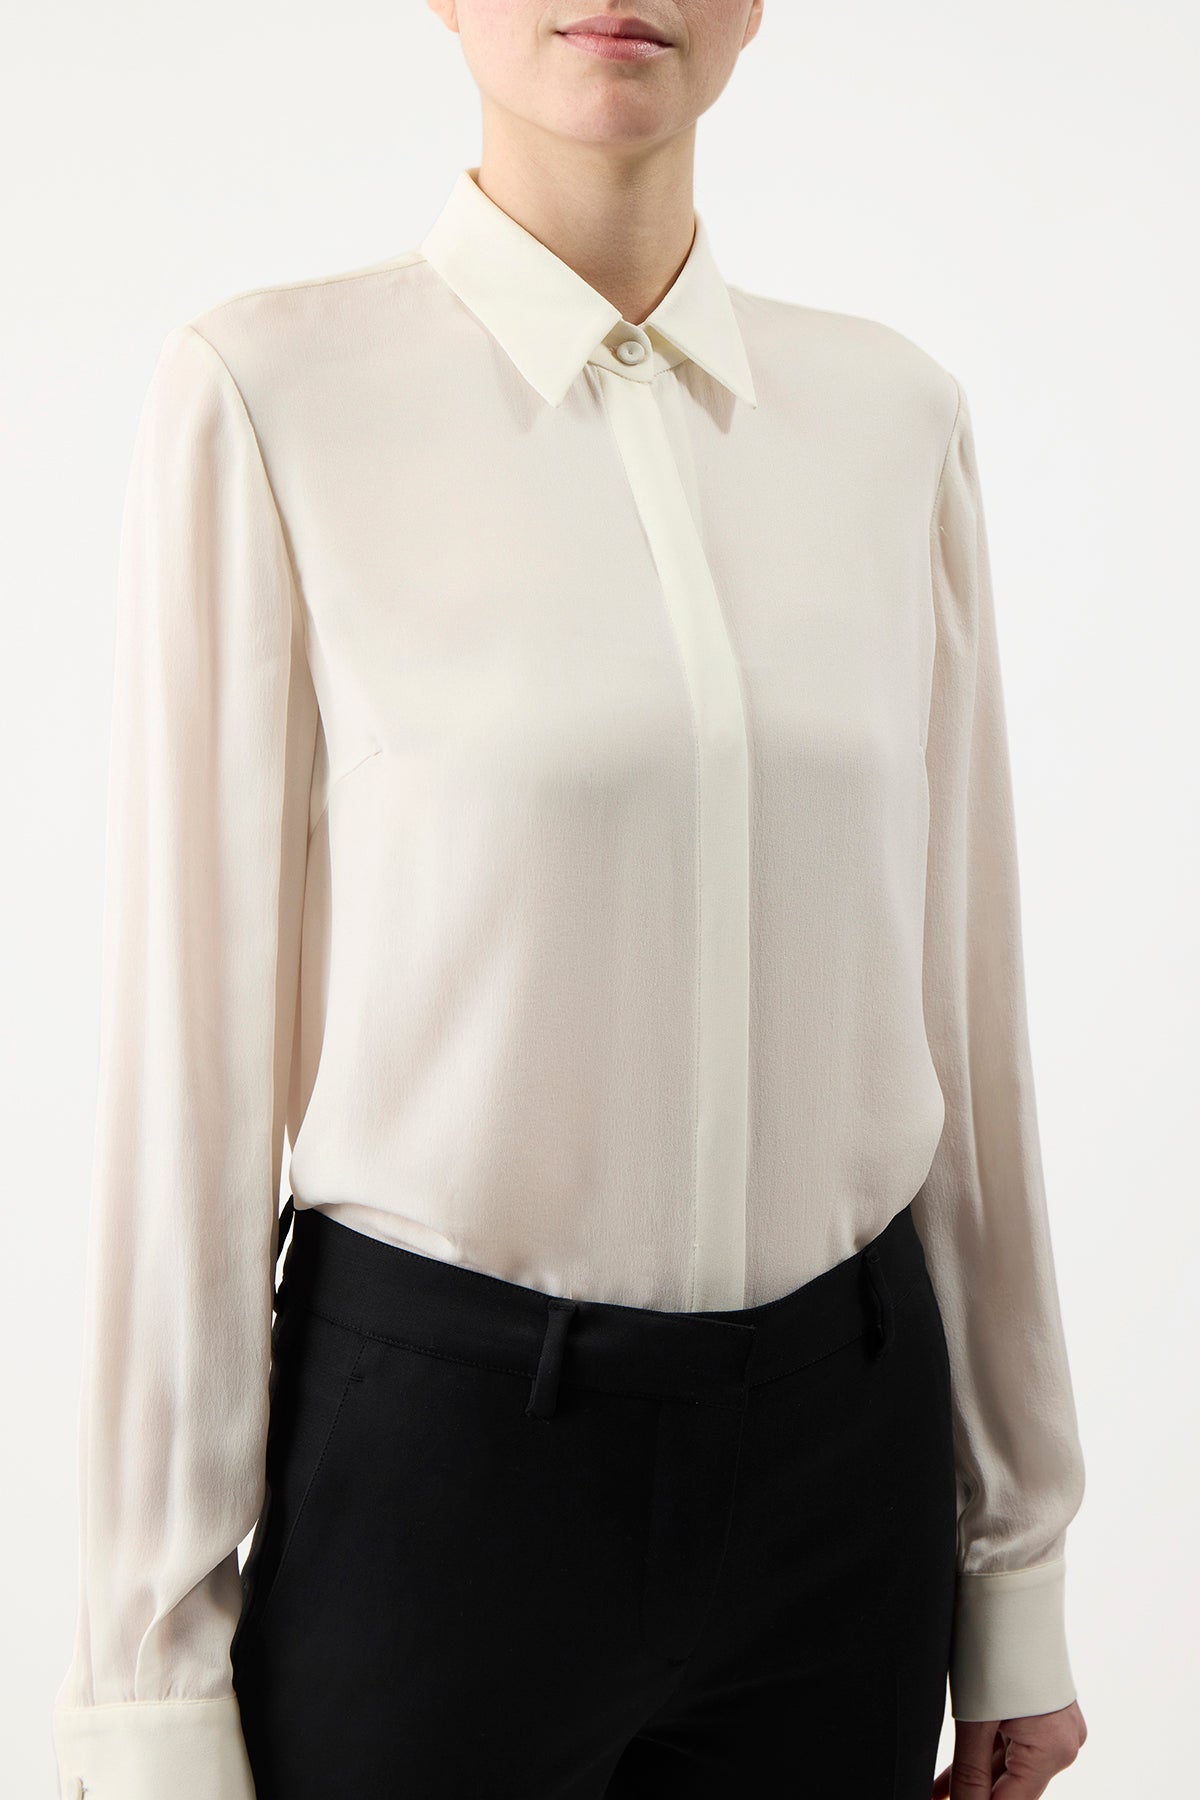 Henri Blouse in Ivory Silk Cashmere